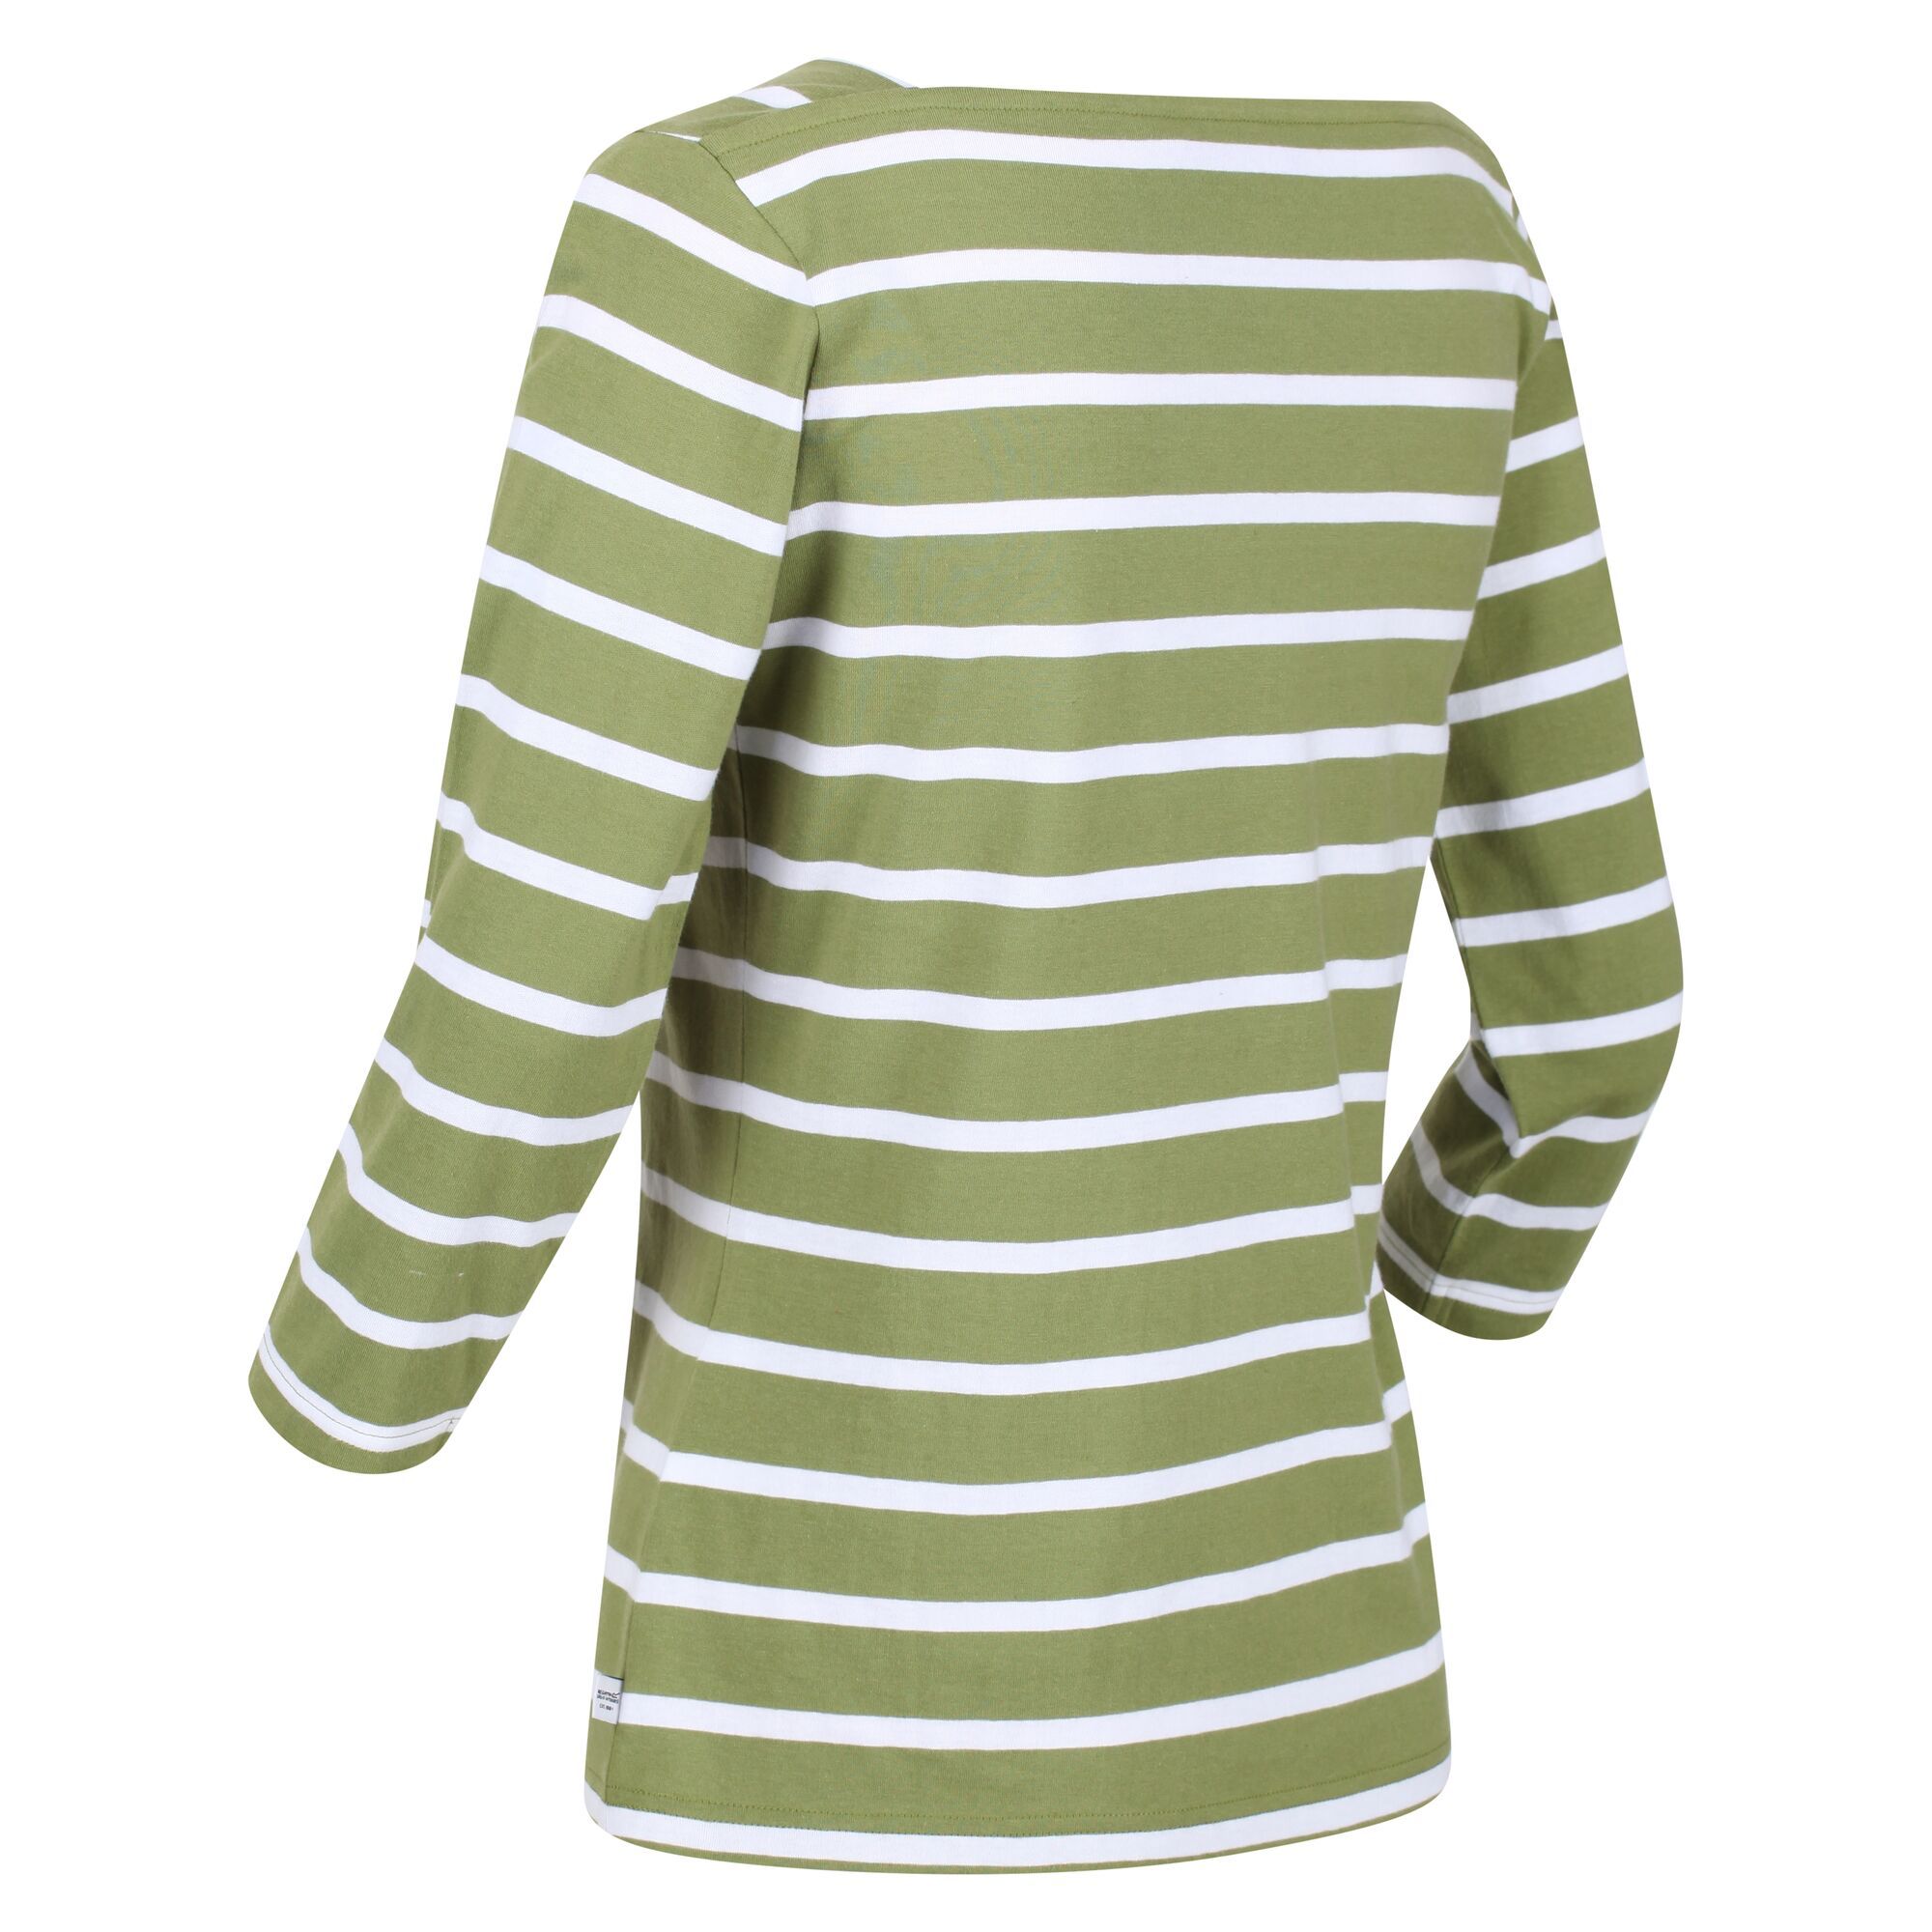 100% Cotton. Fabric: Coolweave. Design: Stripe. Sleeve-Type: 3/4 Sleeve. Neckline: Square Neck. Branded Tab, Side Vents, Supersoft, Tearaway Label. Fabric Technology: Breathable. Sustainable Materials.